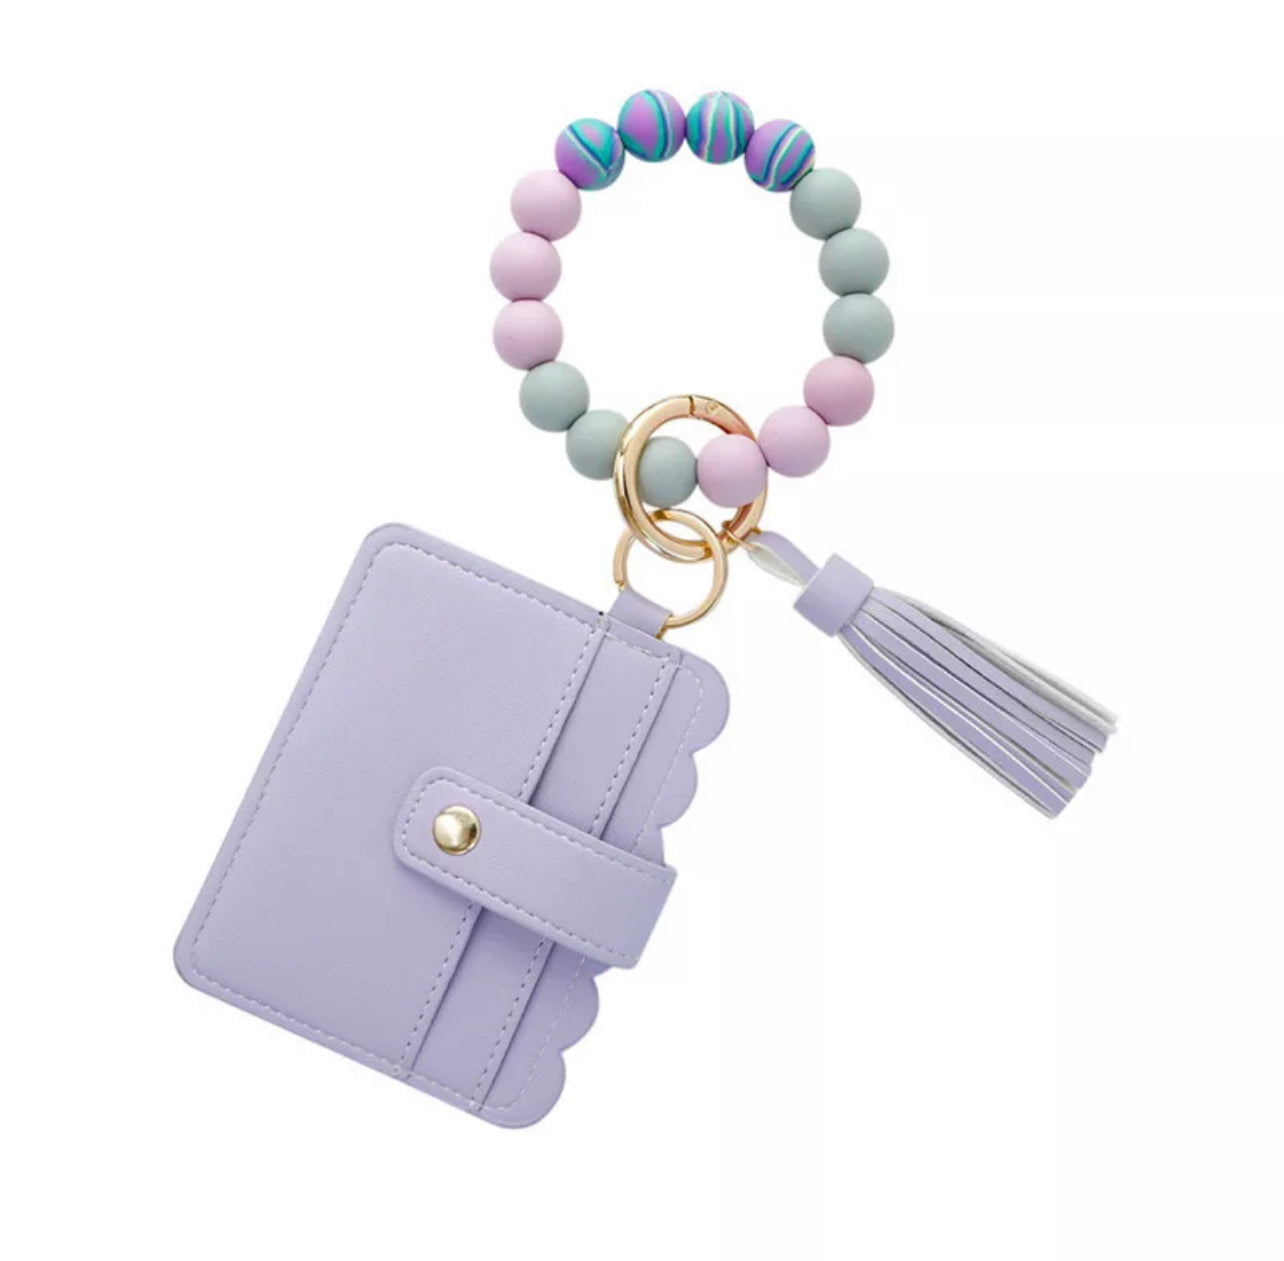 colorful silicone bracelet with lavender wallet and tassel attached to it.